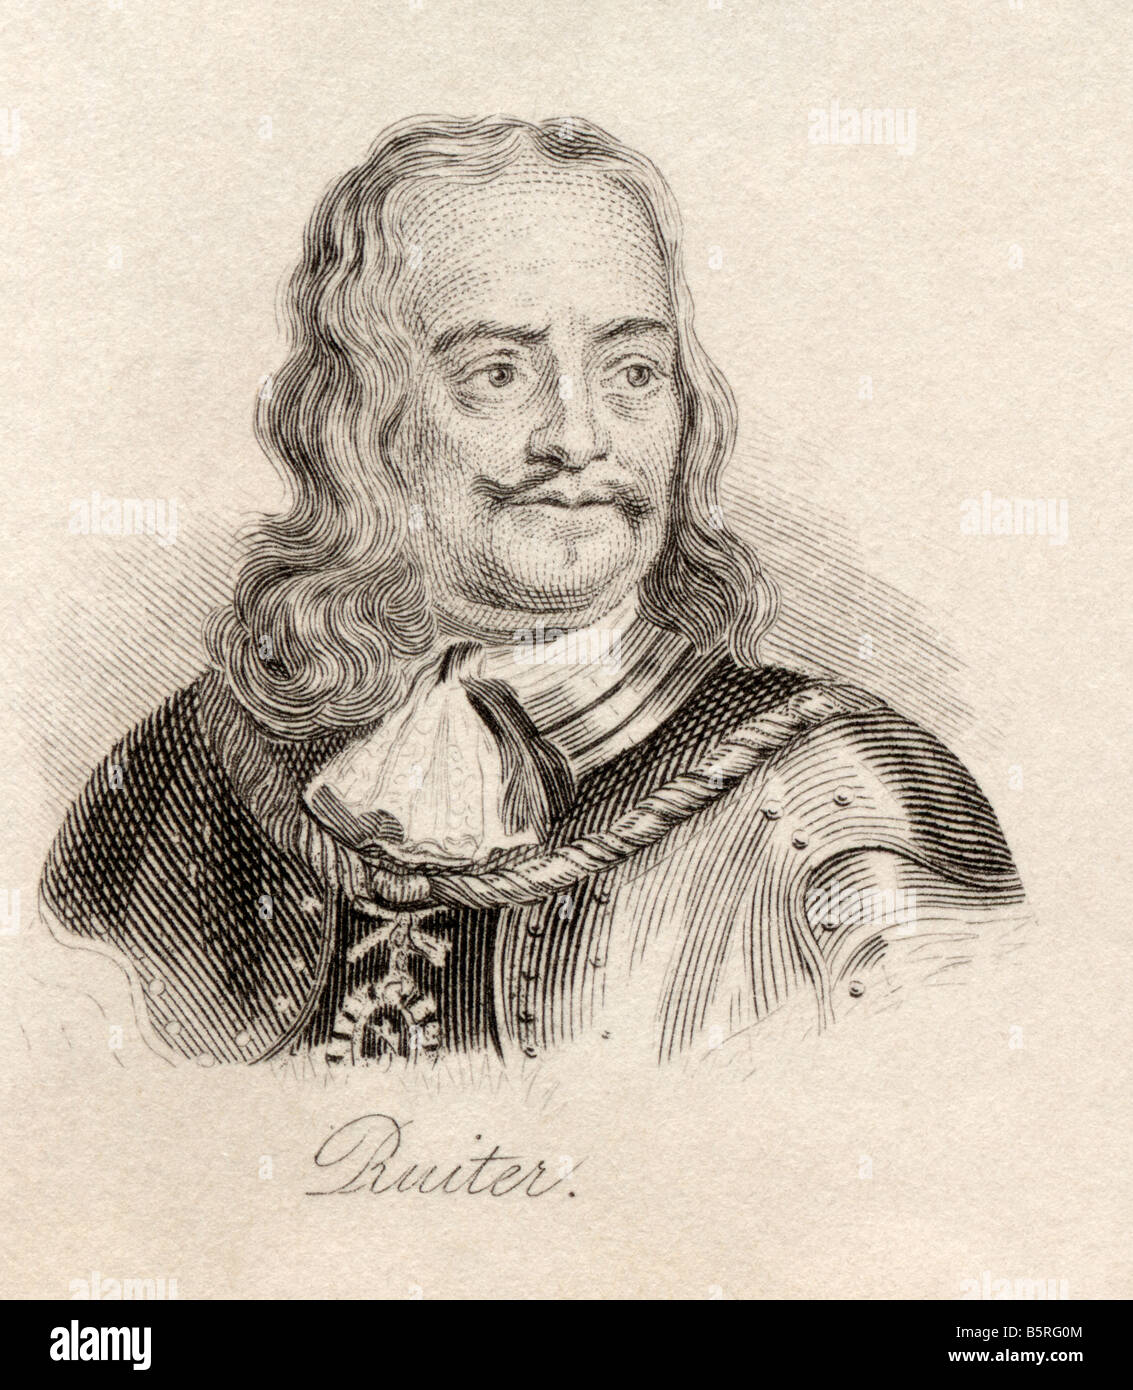 Michiel Adriaenszoon de Ruyter, 1607 - 1676. Dutch admiral.  From the book Crabb's Historical Dictionary, published 1825. Stock Photo